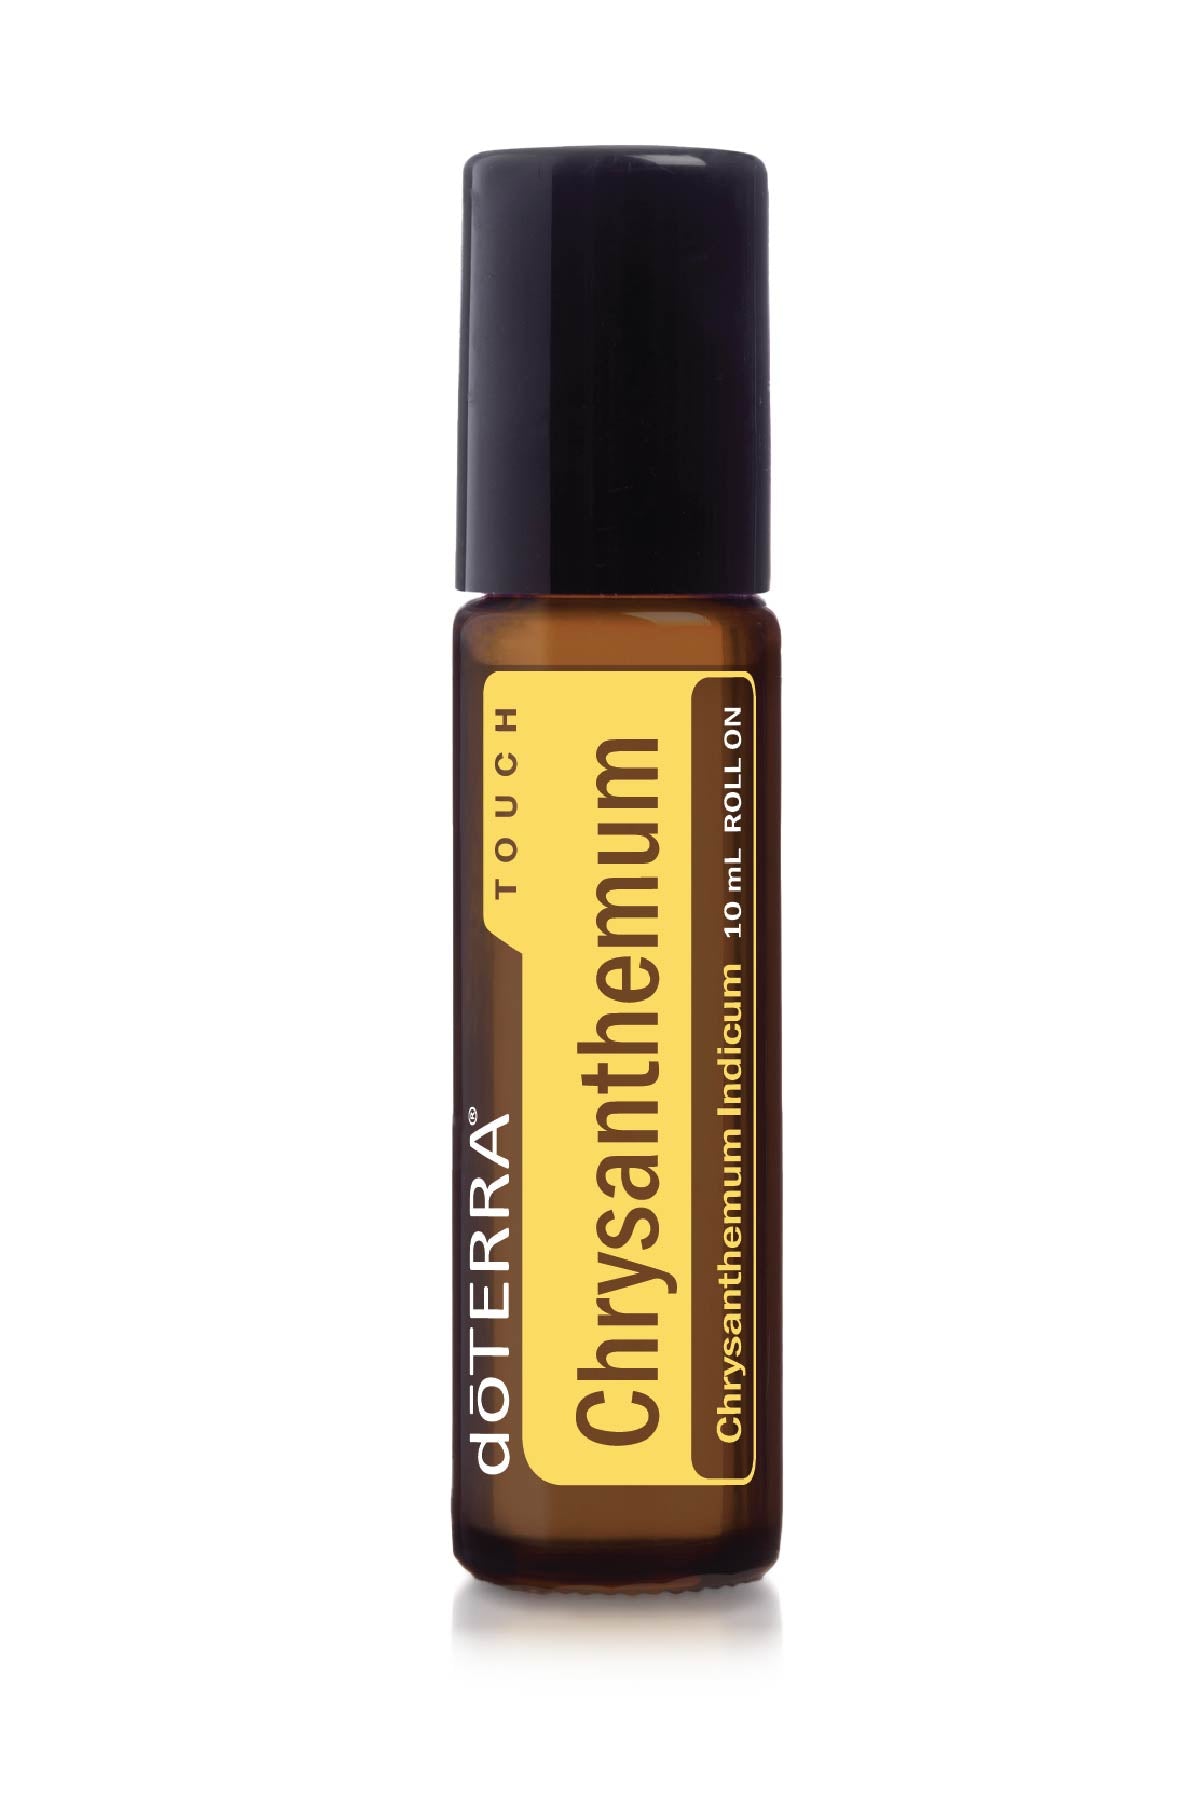 Chrysanthemum Touch by doTERRA 10ml Roll On - LIMITED TIME